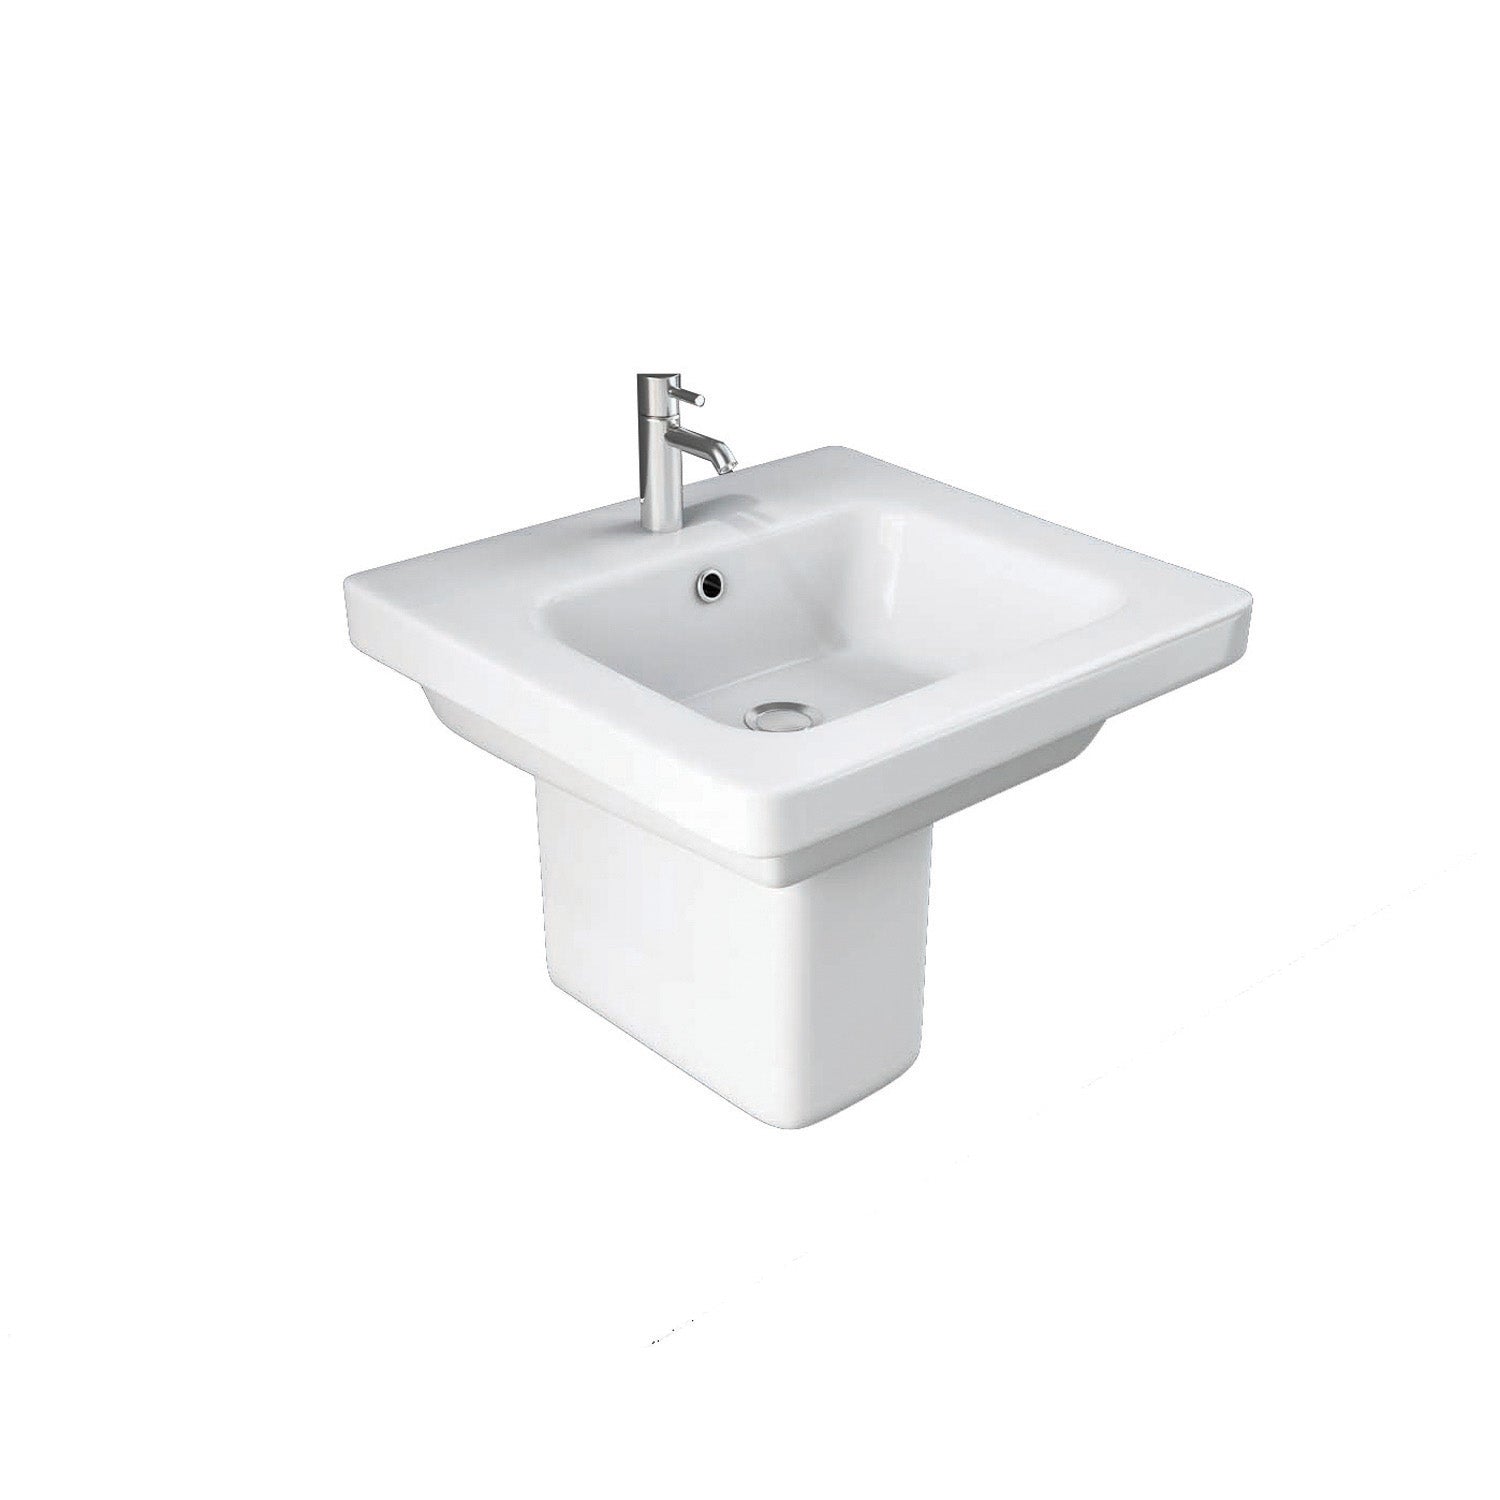 650mm Vesta Wall Hung Basin on a white background